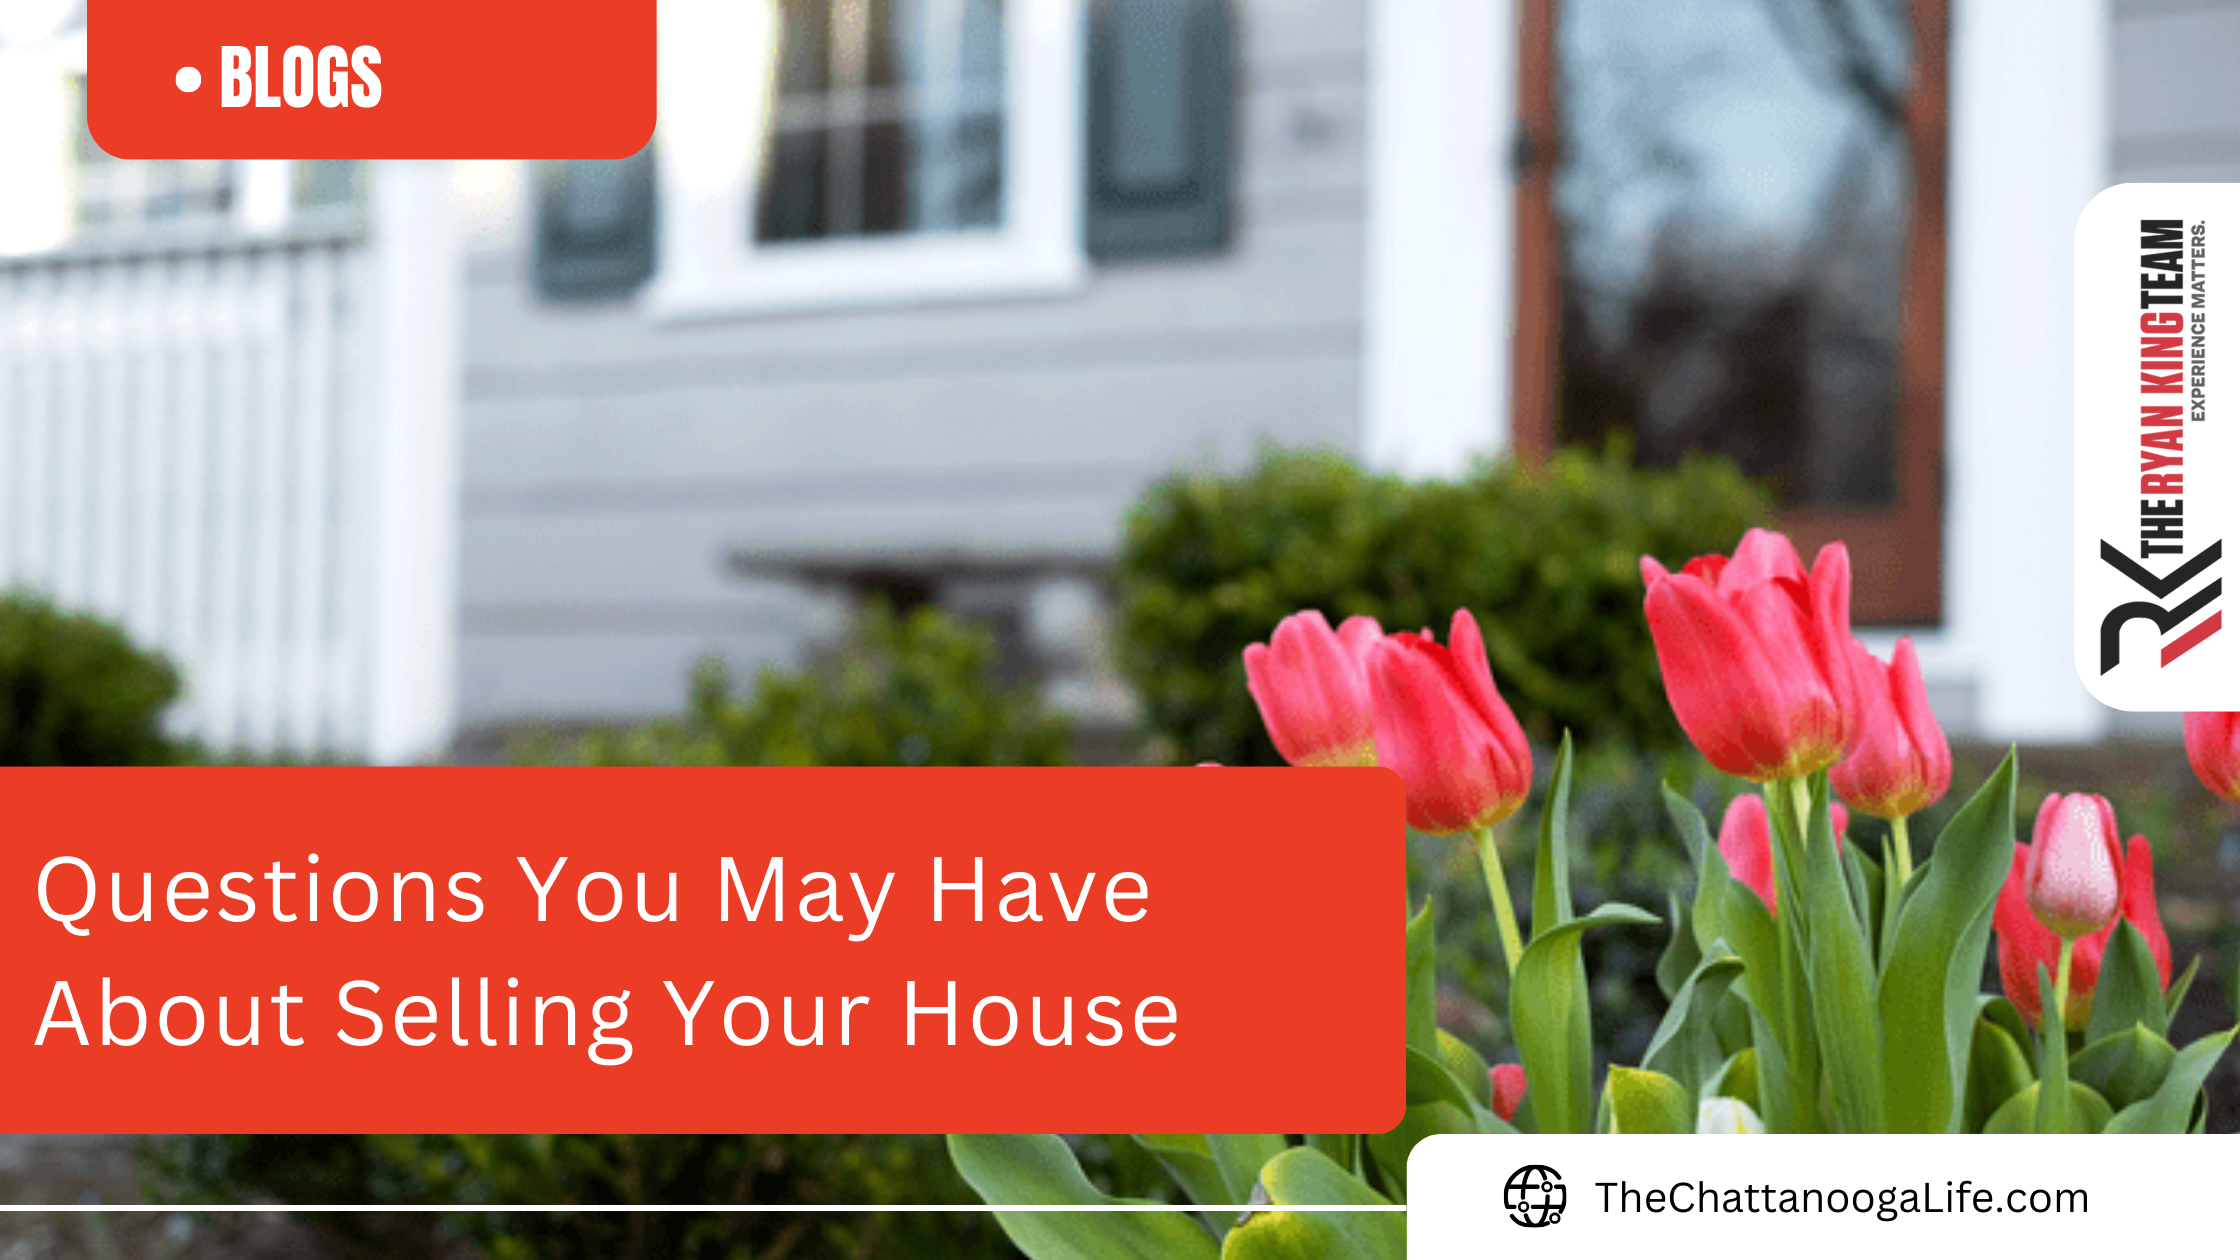 Questions You May Have About Selling Your House